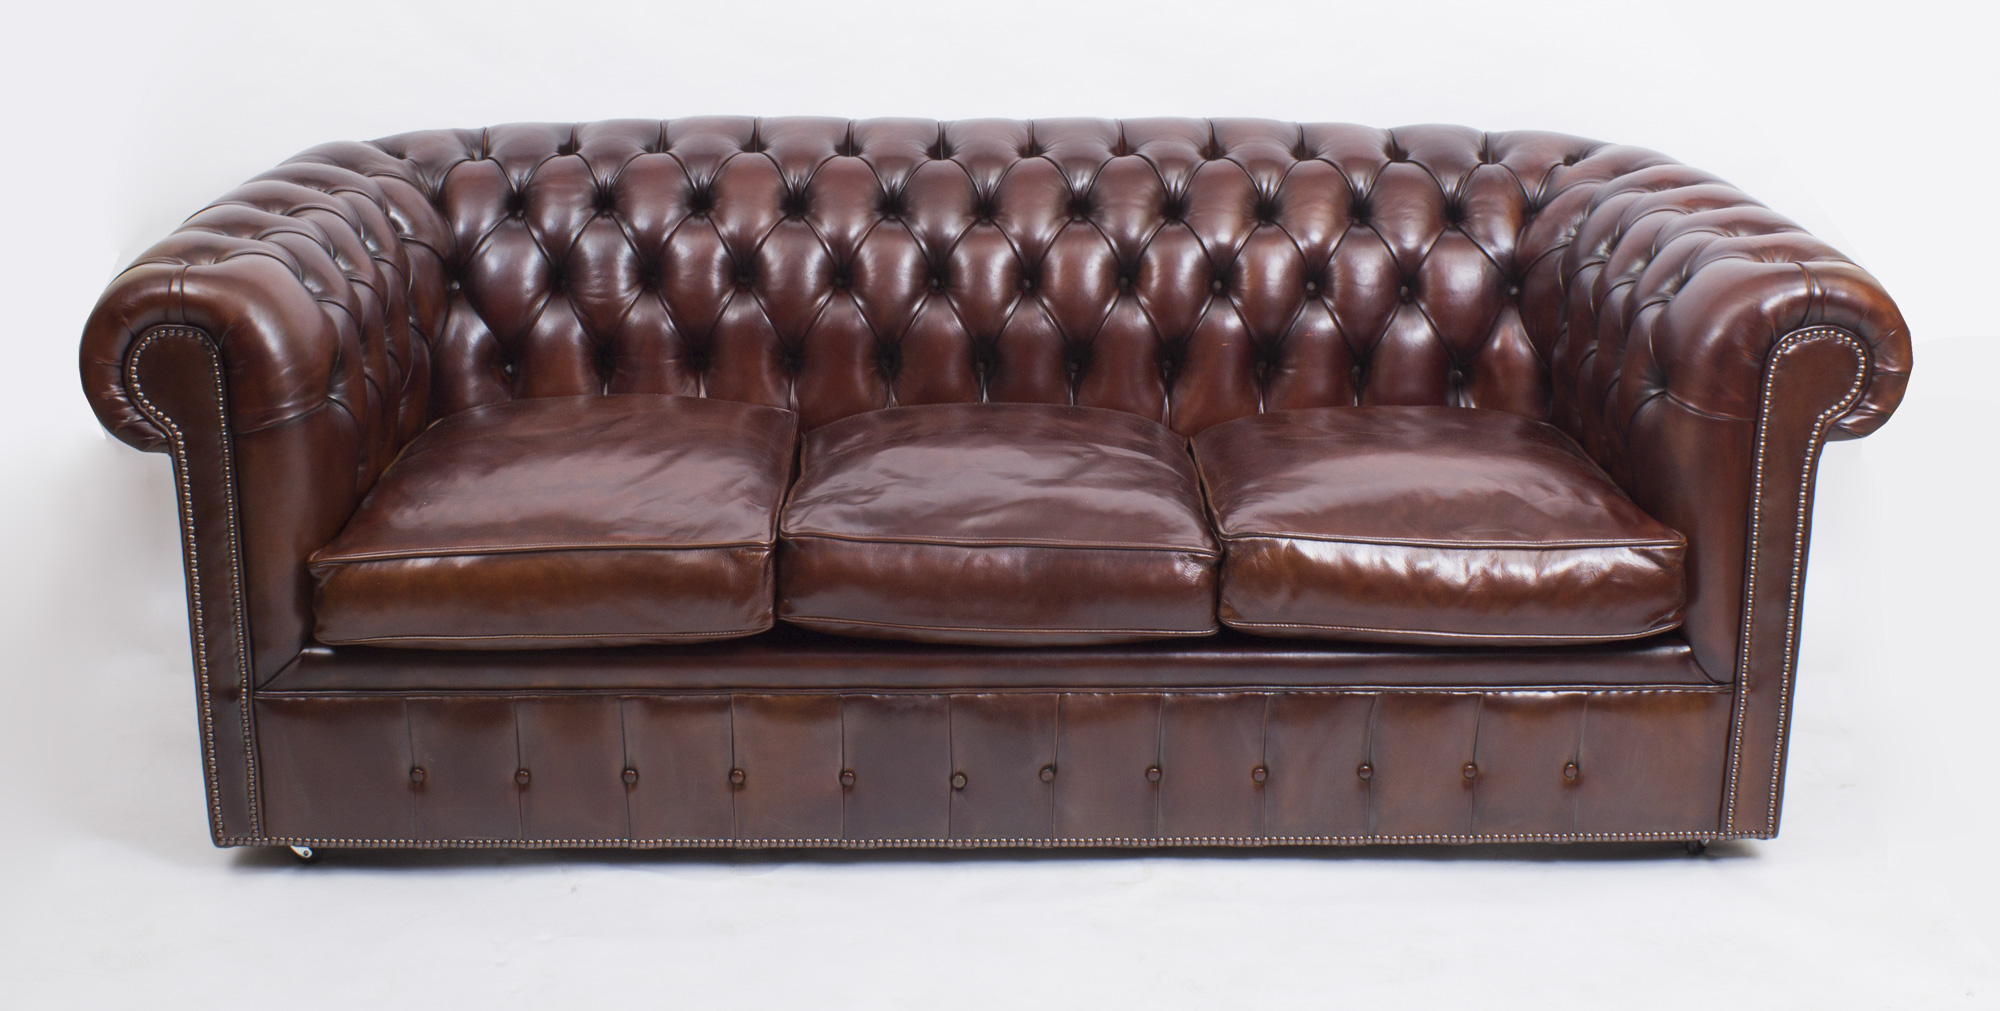 bespoke leather chesterfield sofa